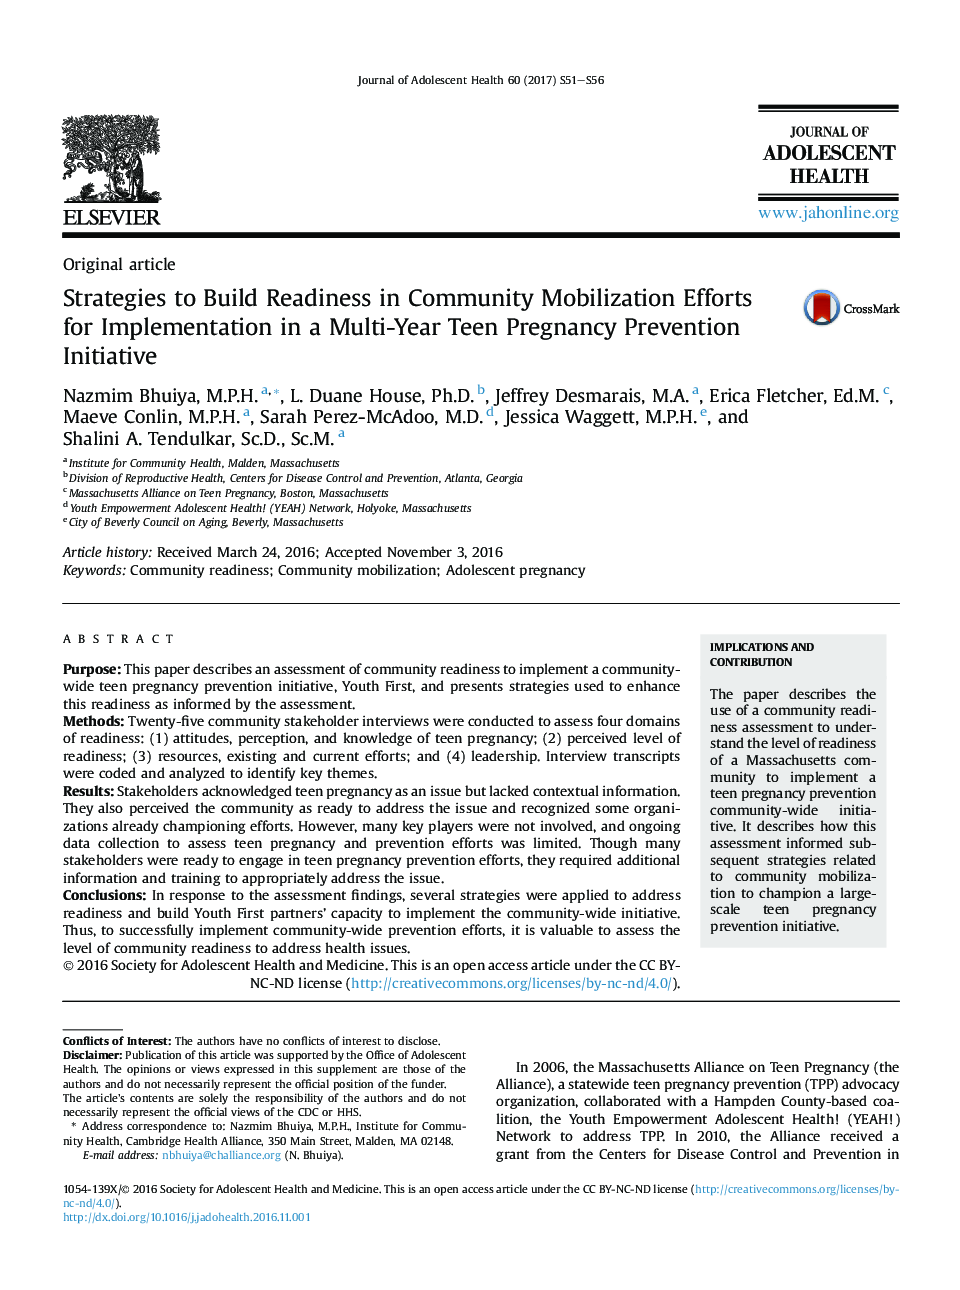 Strategies to Build Readiness in Community Mobilization Efforts for Implementation in a Multi-Year Teen Pregnancy Prevention Initiative